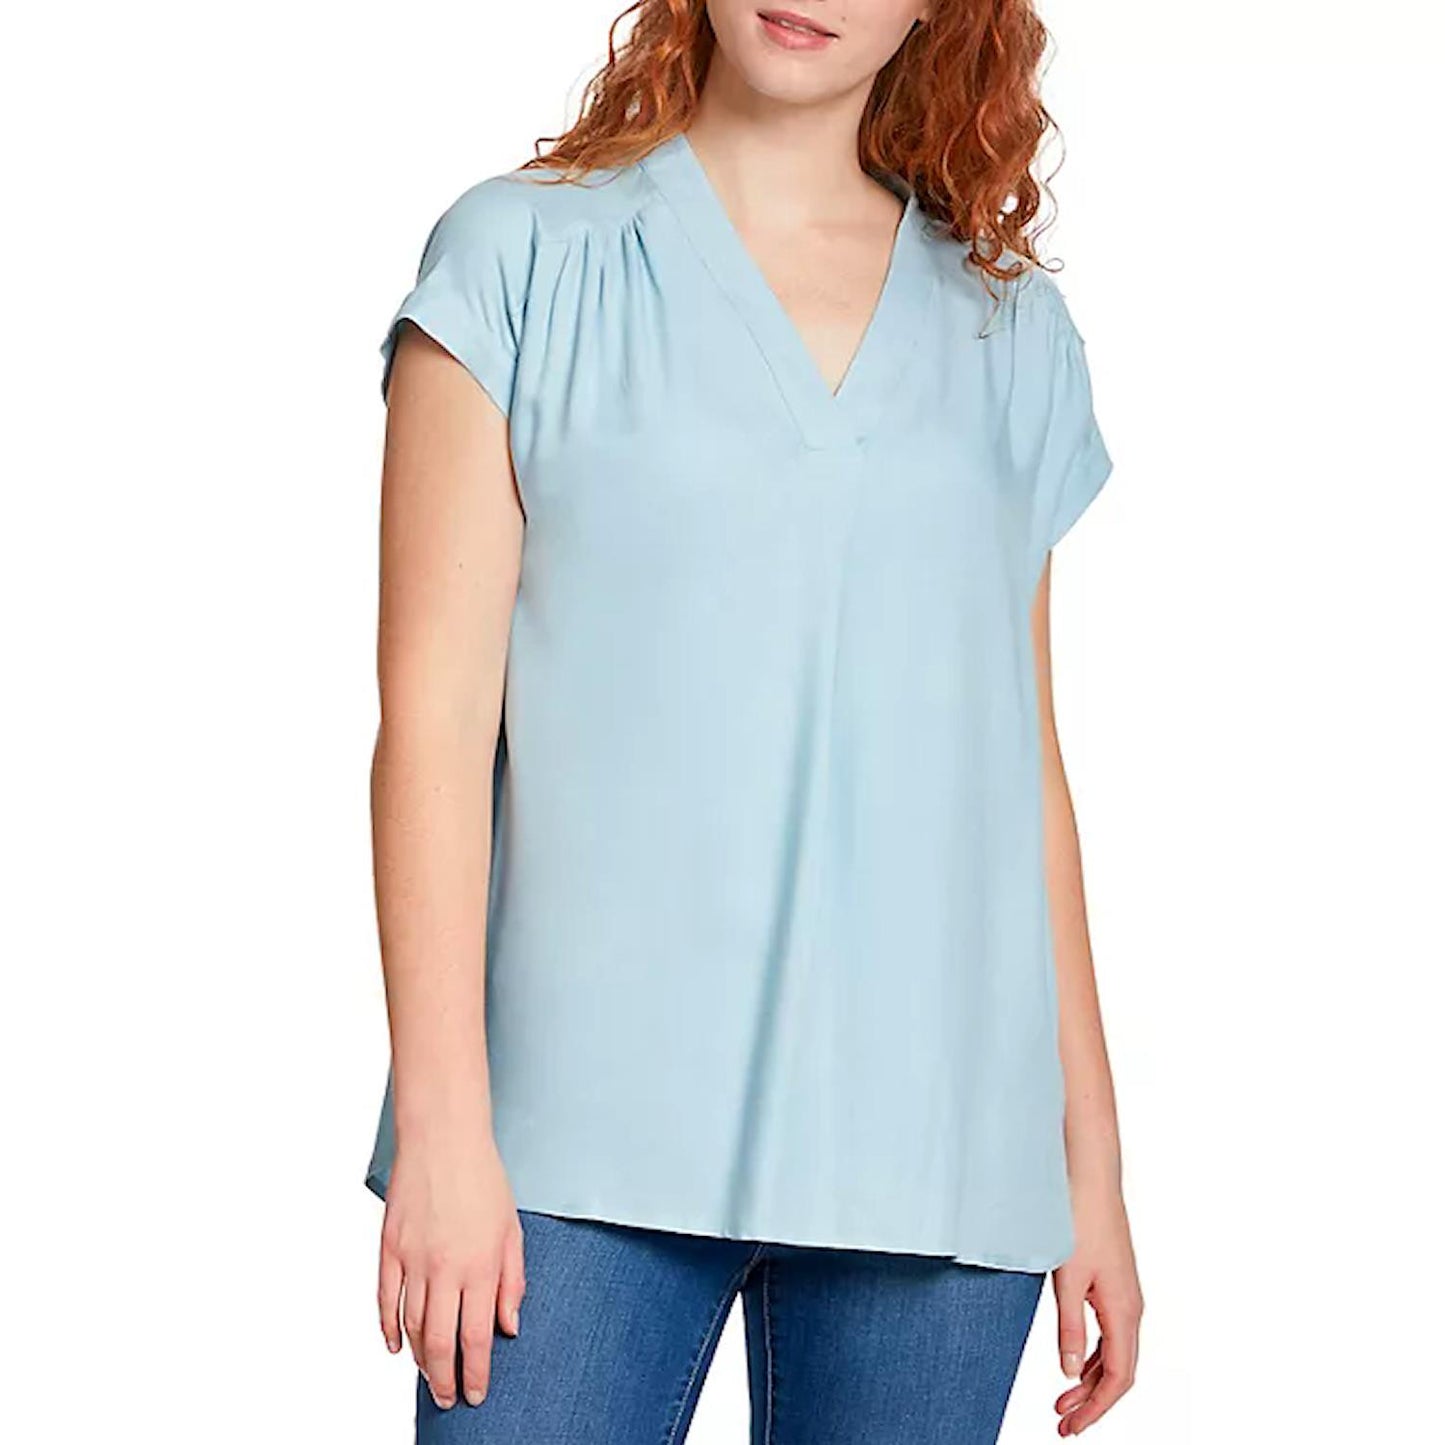 Nine West Women's Lightweight Relaxed Fit Woven Popover V-Neck Top